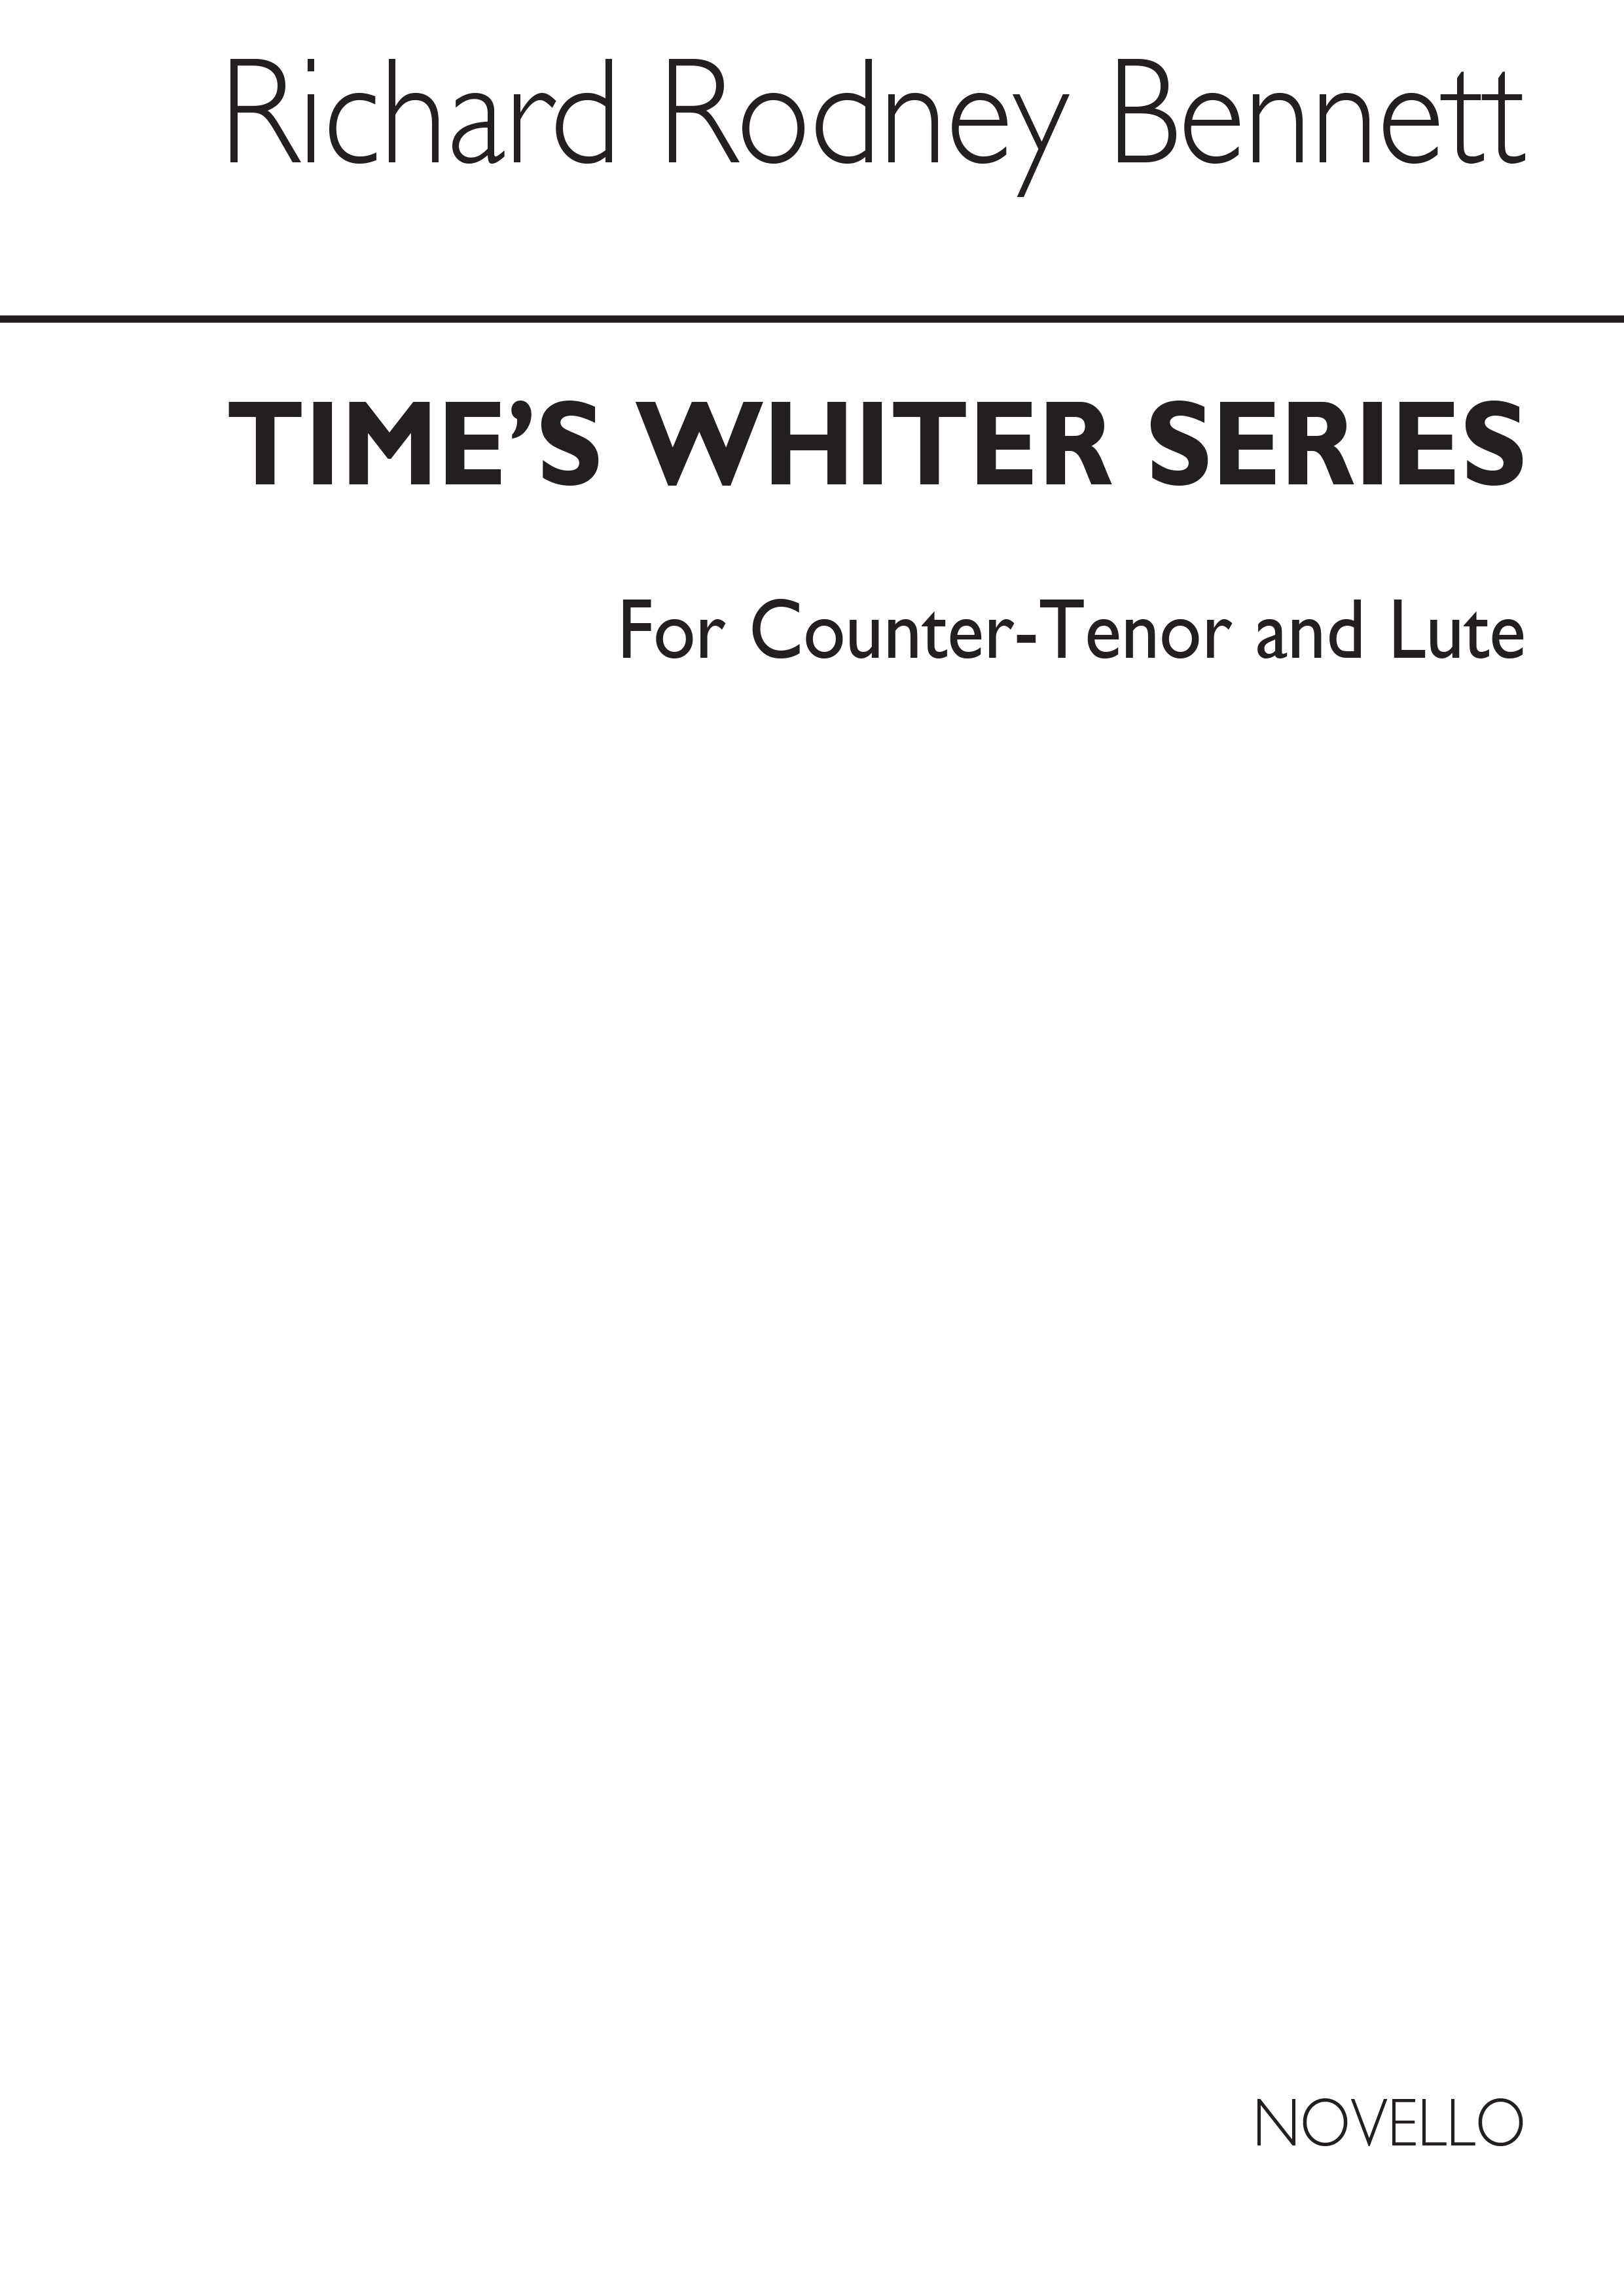 Richard Rodney Bennett: Times Whiter Series For Counter Tenor With Lute Accompan